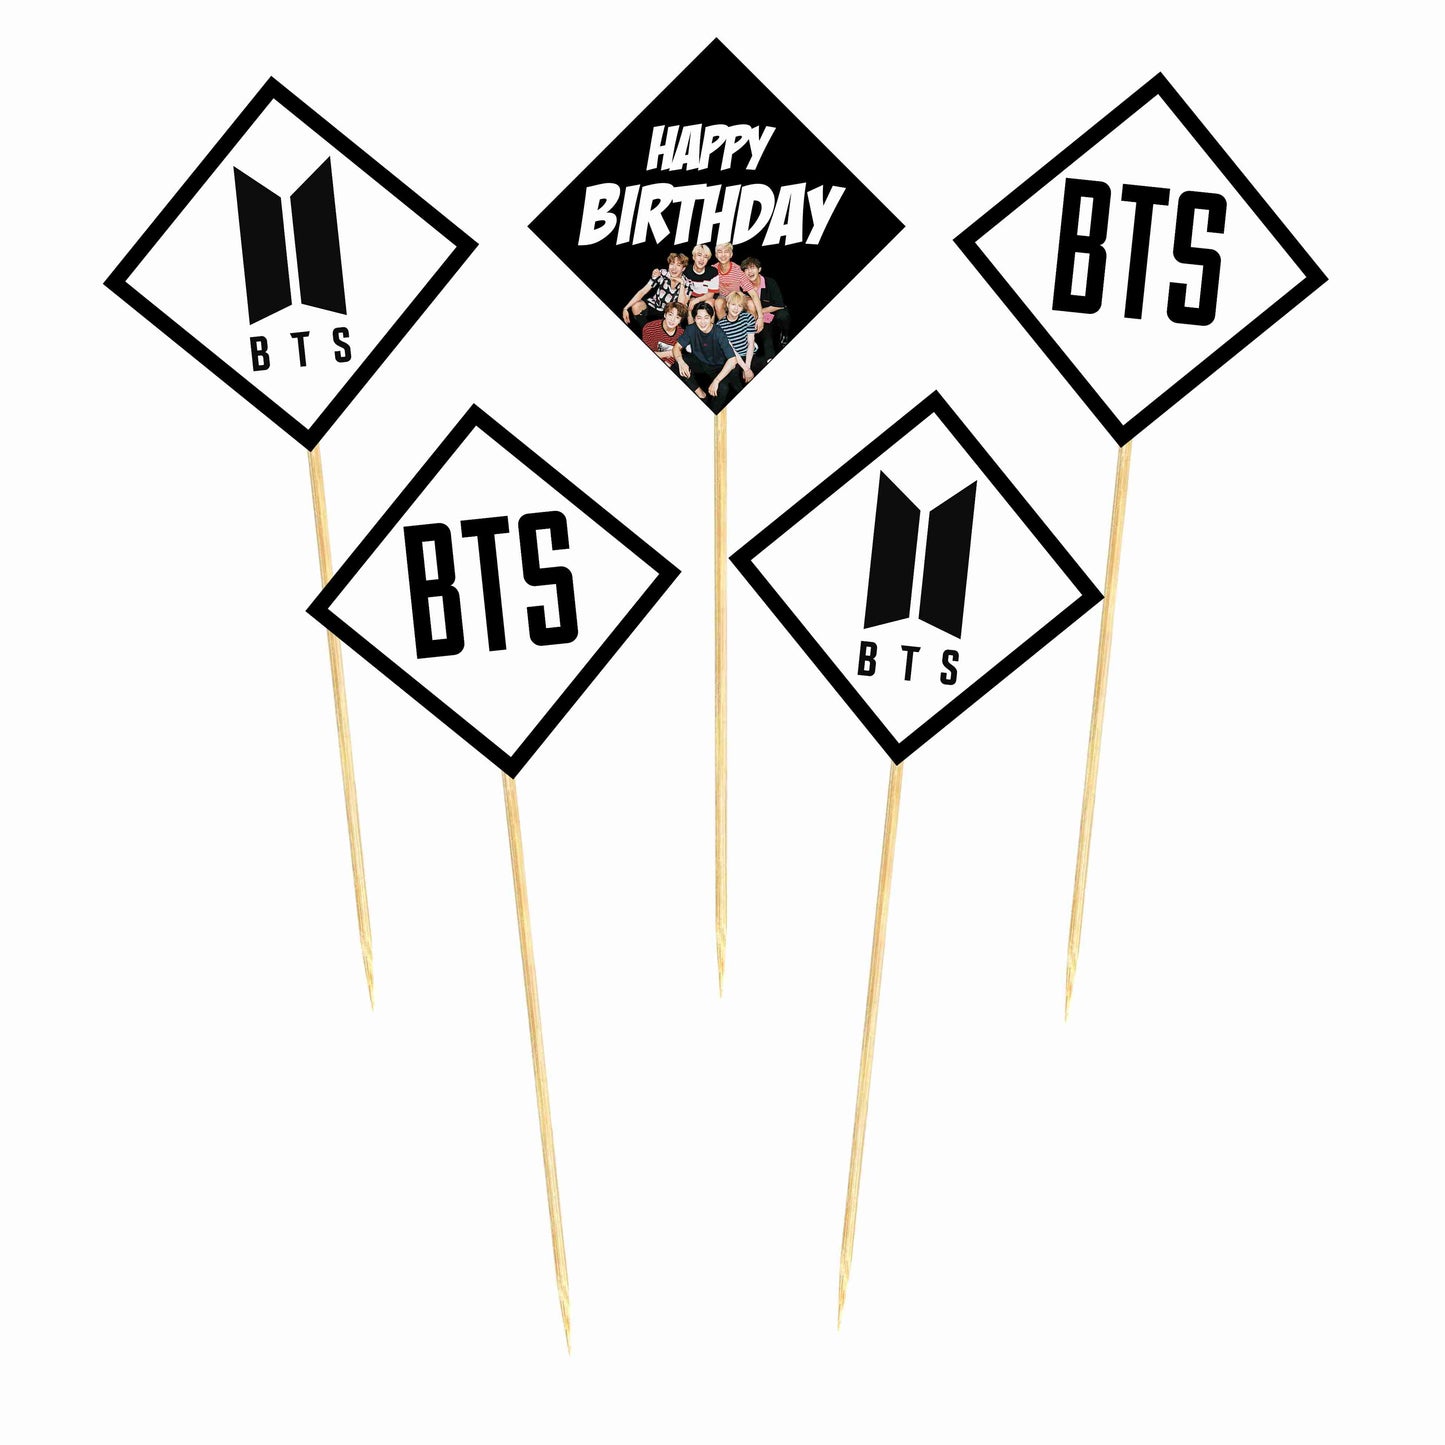 BTS Theme Cake Topper Pack of 10 Nos for Birthday Cake Decoration Theme Party Item For Boys Girls Adults Birthday Theme Decor